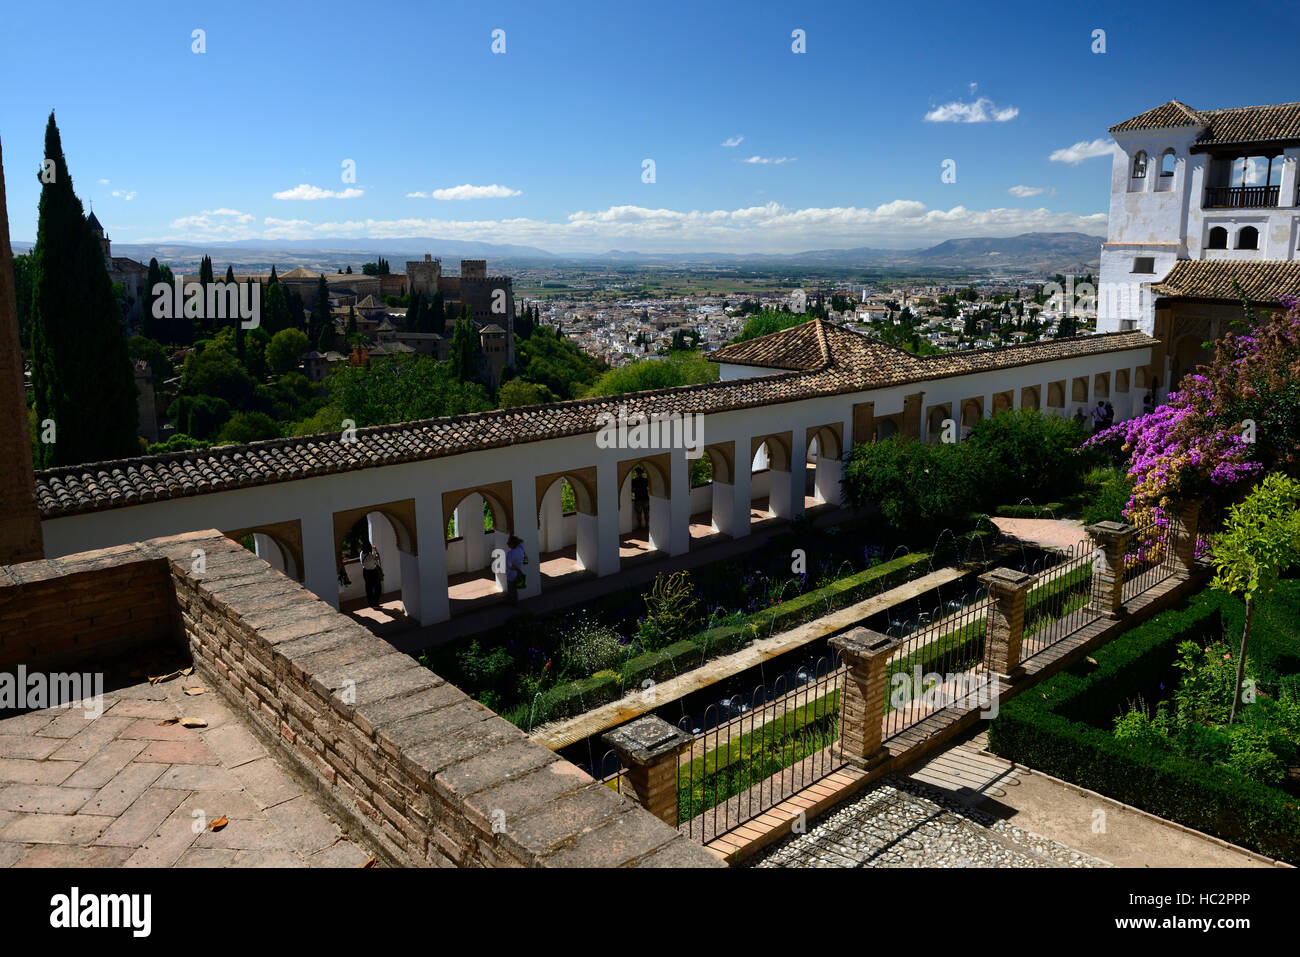 Panoramica sulle terrazze giardini Generalife Alhambra Palace UNESCO World Heritage Site RM floral Foto Stock